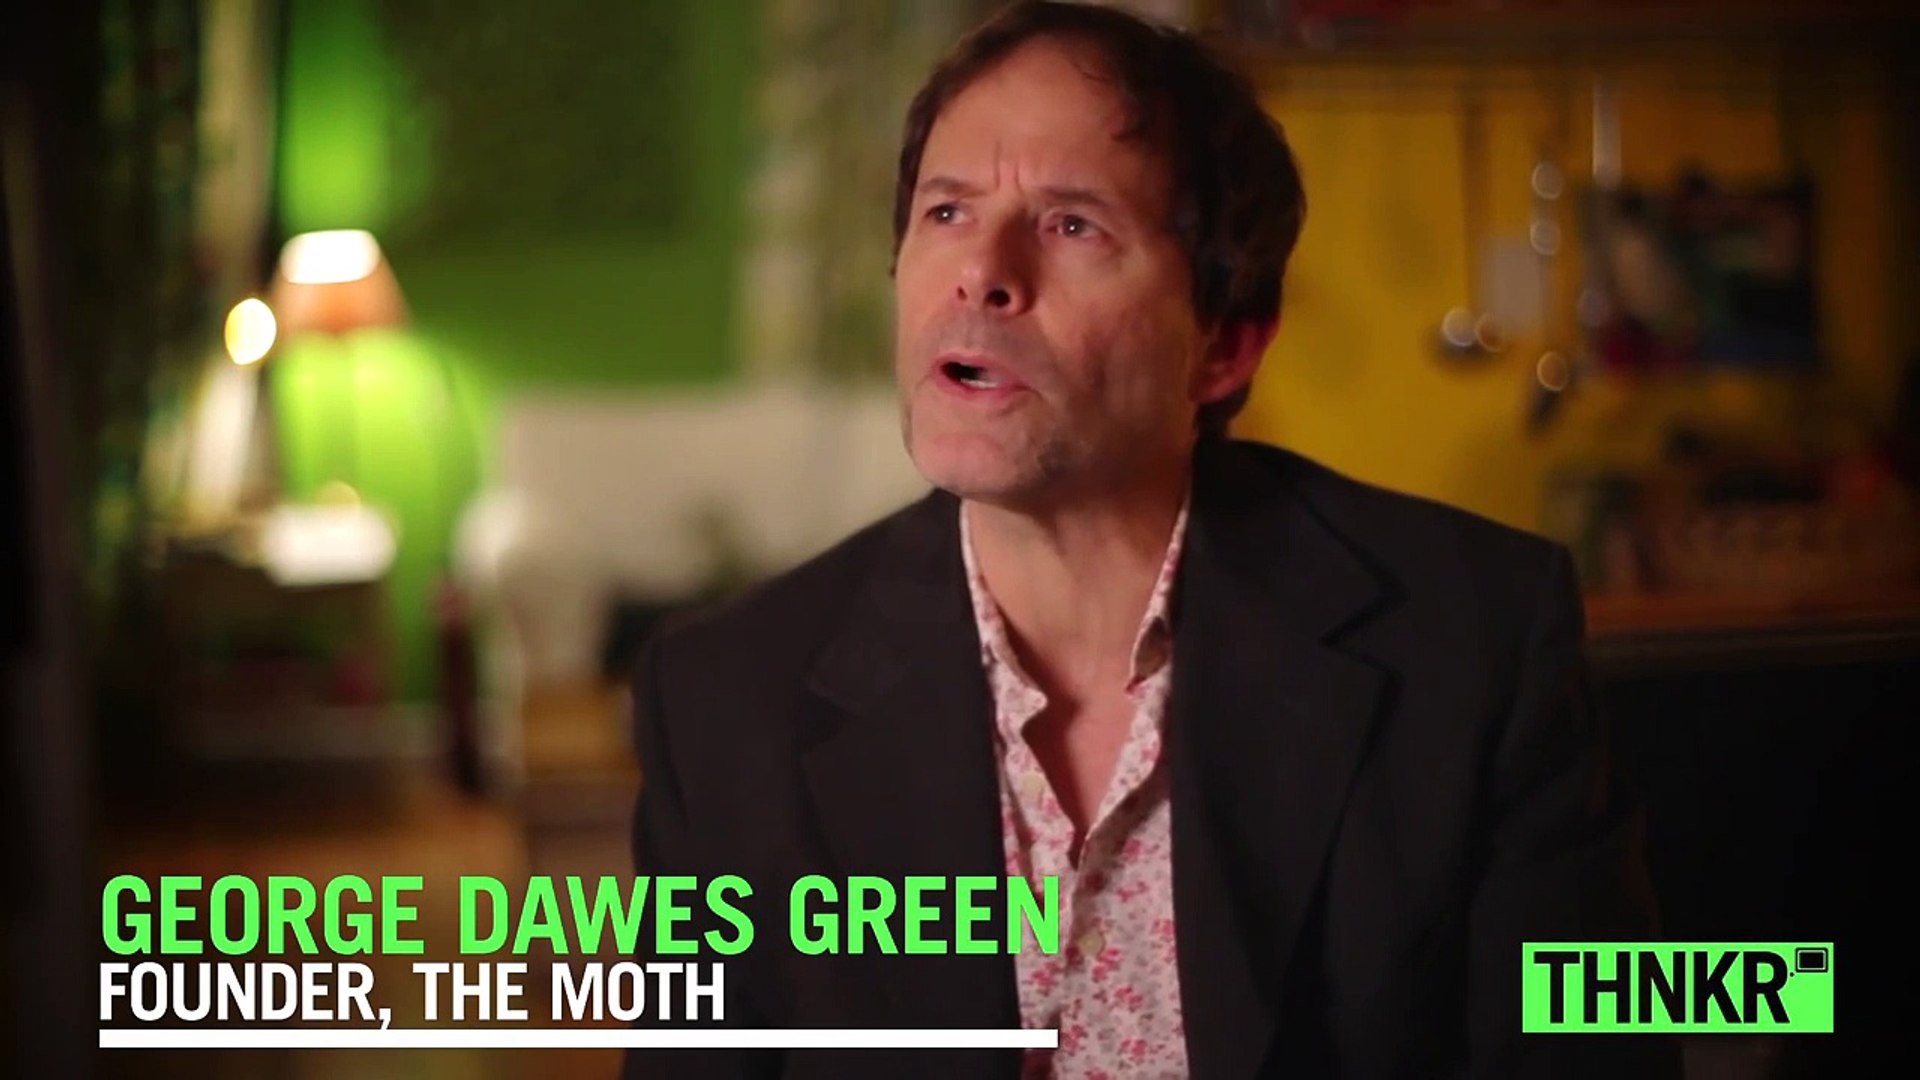 The Moth: The Story Behind the Storytellers